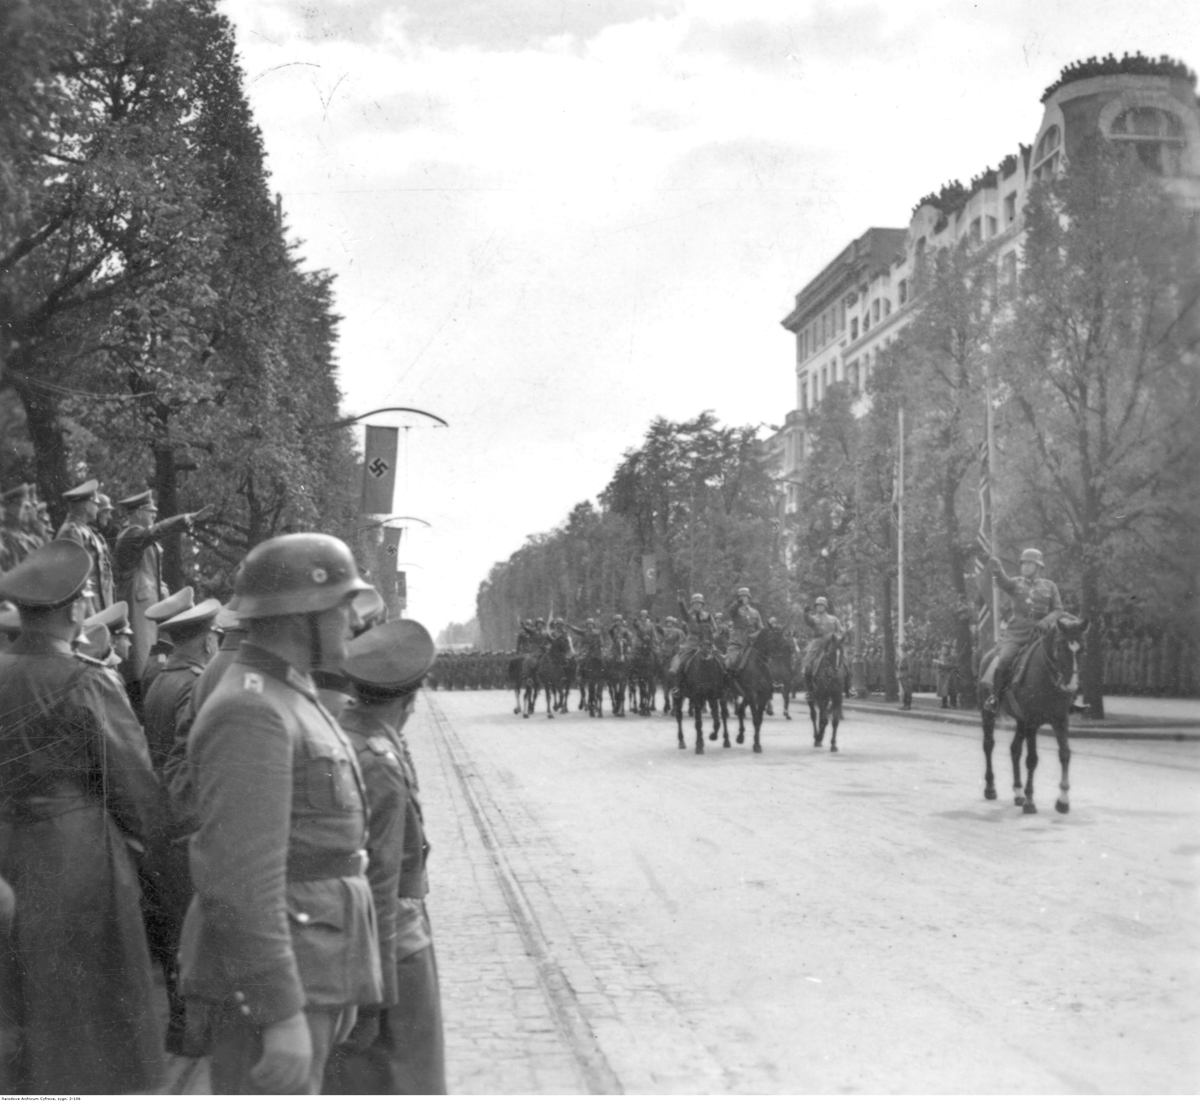 Street of Warsaw. There is a parade in the middle. At its front, a German soldier riding on horseback and saluting Hitler. On the left, German soldiers and Adolf Hitler saluting.